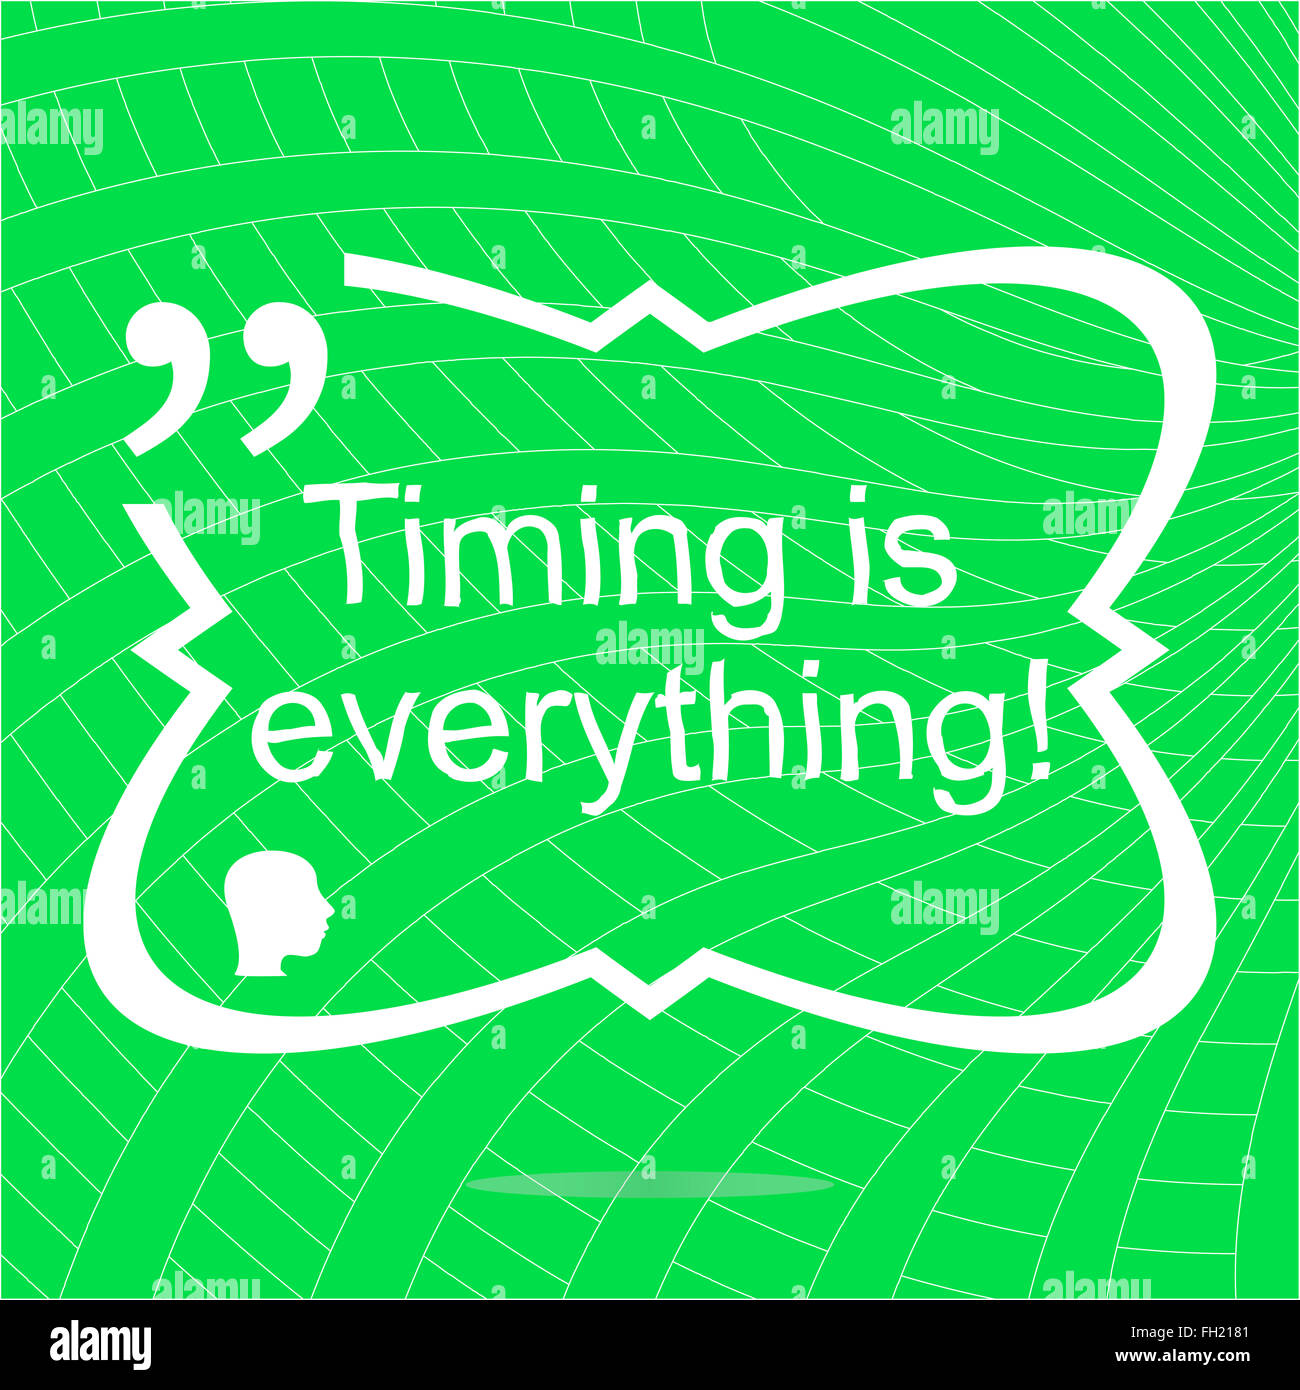 Timing is everything. Inspirational motivational quote. Simple trendy design. Positive quote Stock Photo